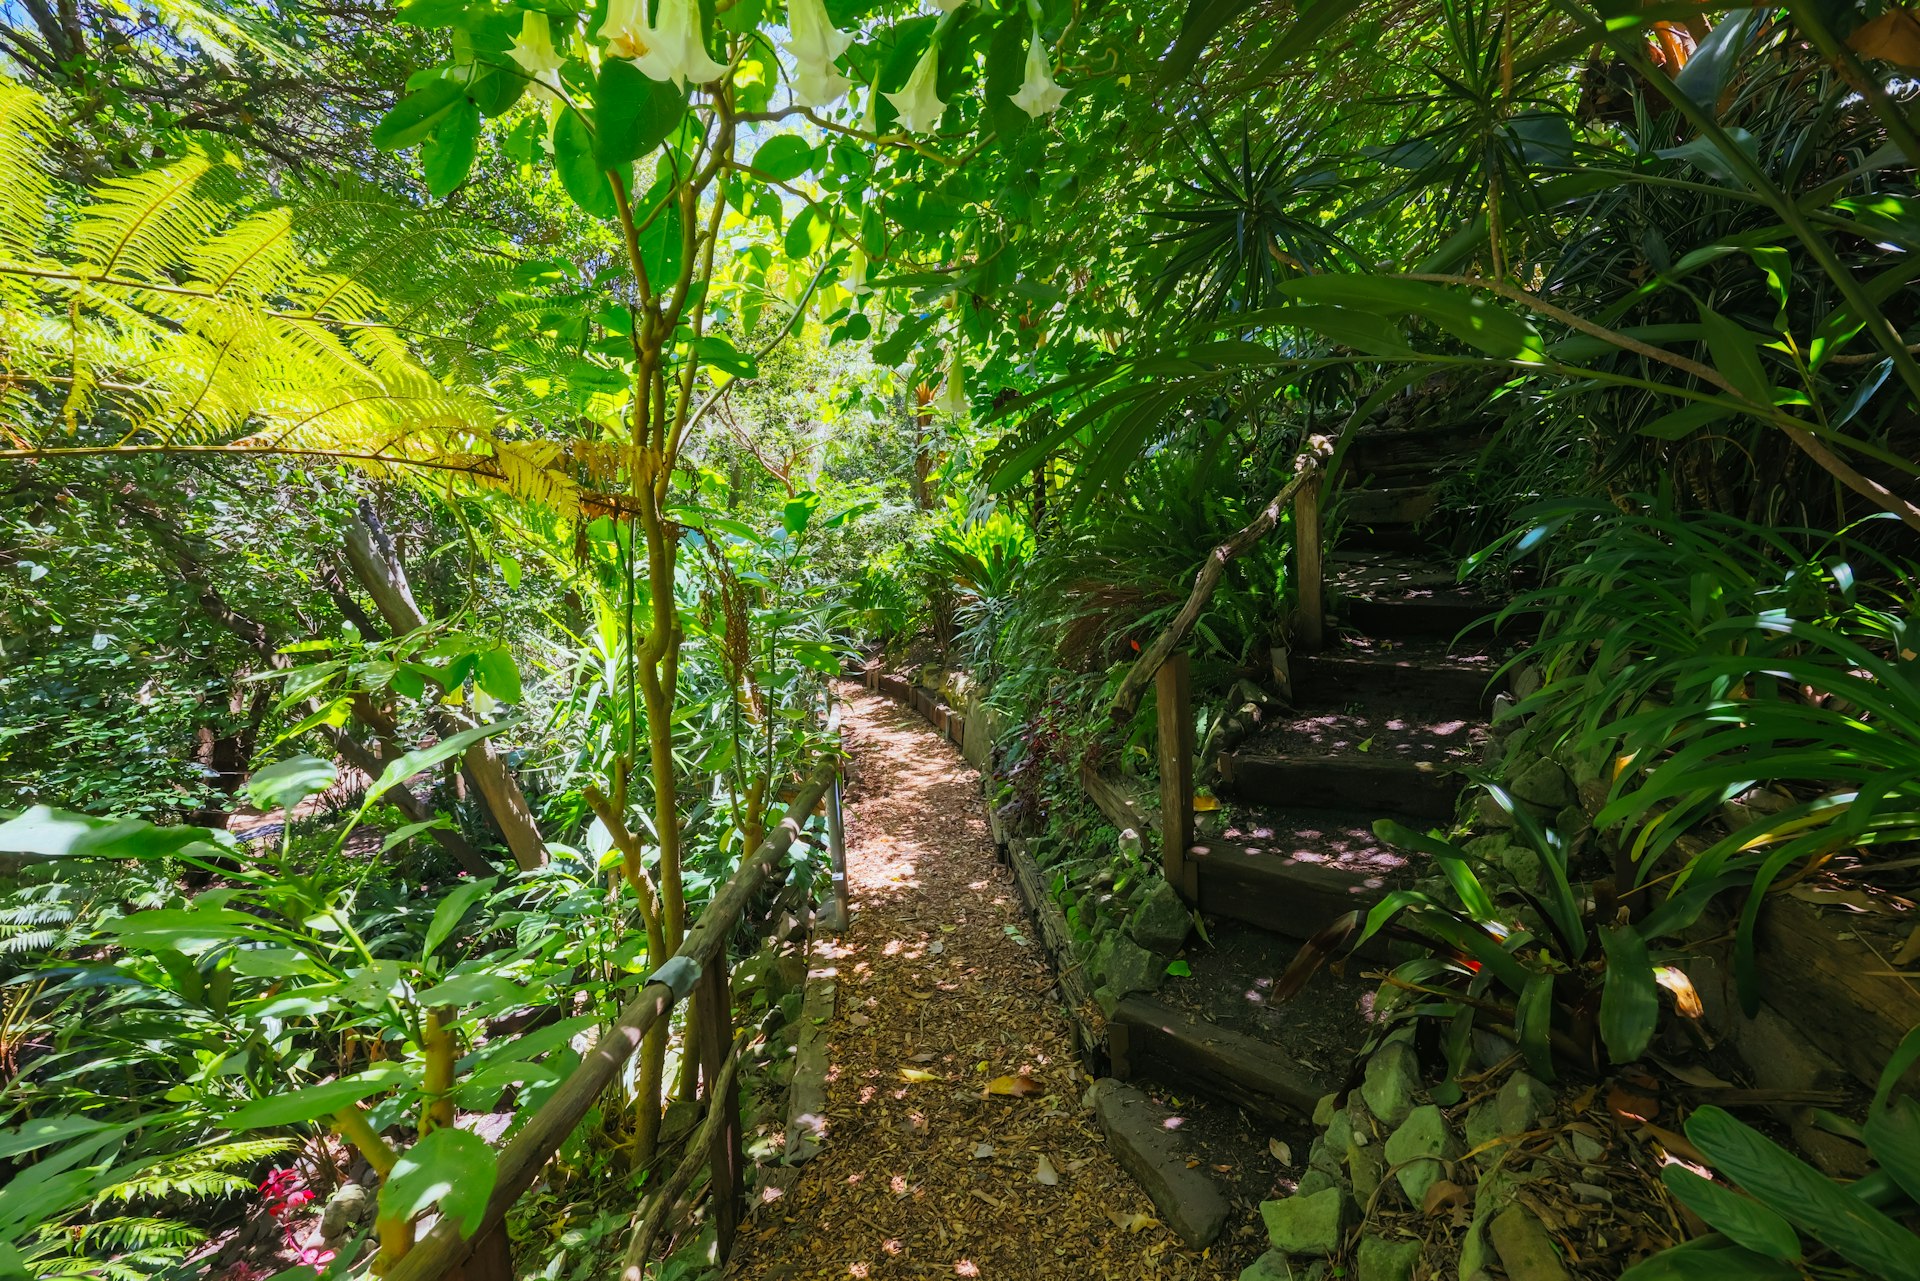 A secluded pathway in the shaded Wendy’s Secret Garden, invitingly leading upwards via rustic wooden steps. The path is flanked by an abundance of tropical plants, with large fronds and white bell-shaped flowers hanging overhead. Dappled sunlight filters through the canopy, casting a pattern of light and shadow on the ground.